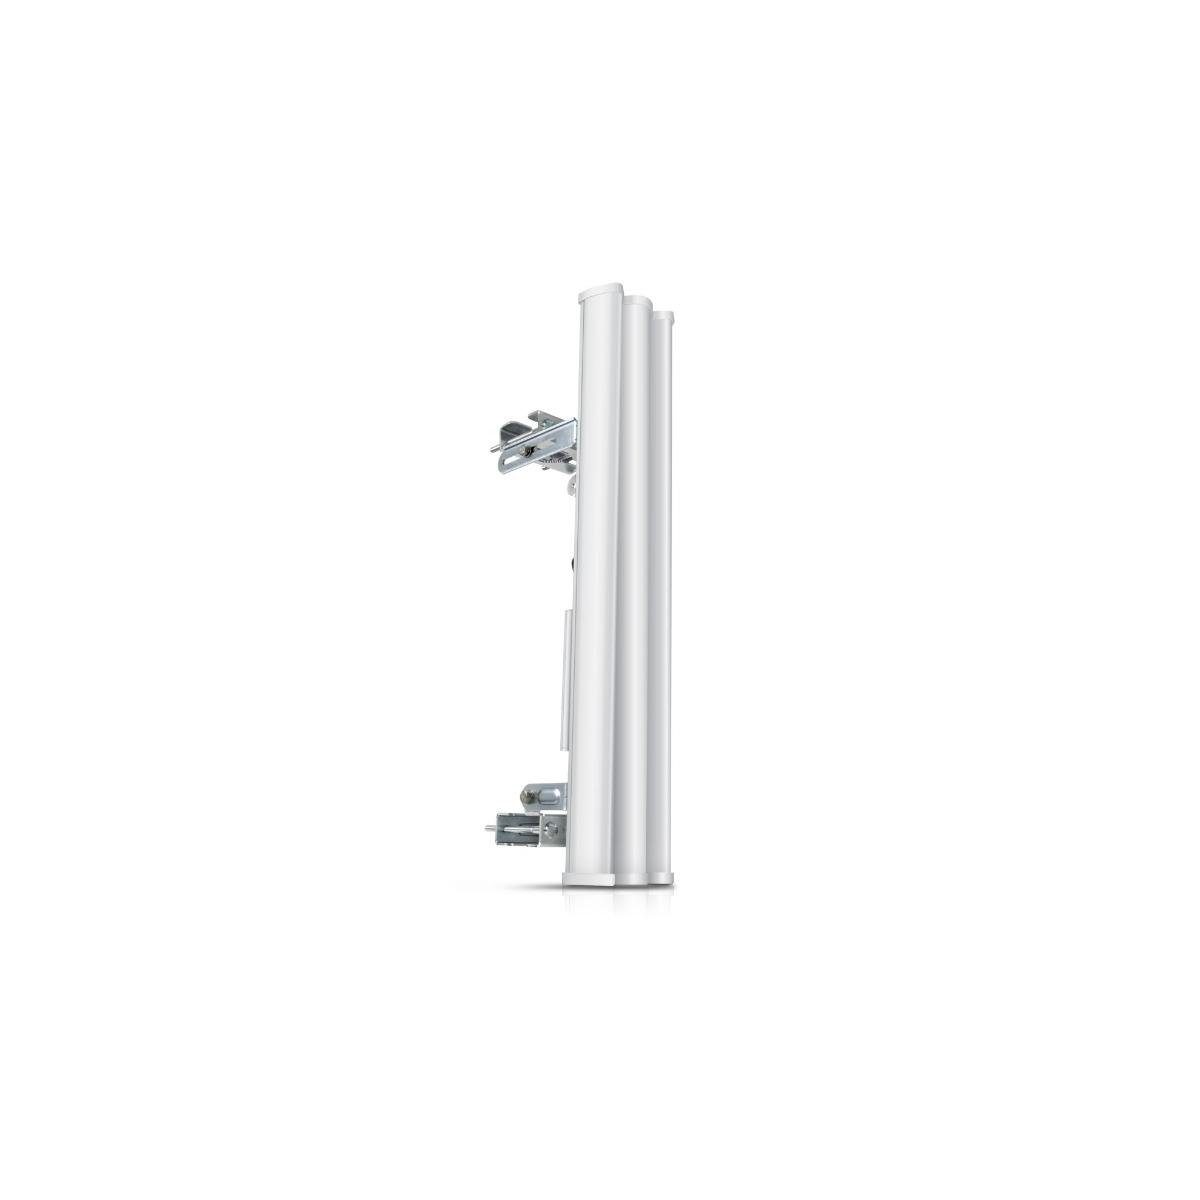 Ubiquiti Networks AM-5G19-120 - AirMax Sector Antenne, 5 GHz 2x2 MIMO WLAN-Antenne